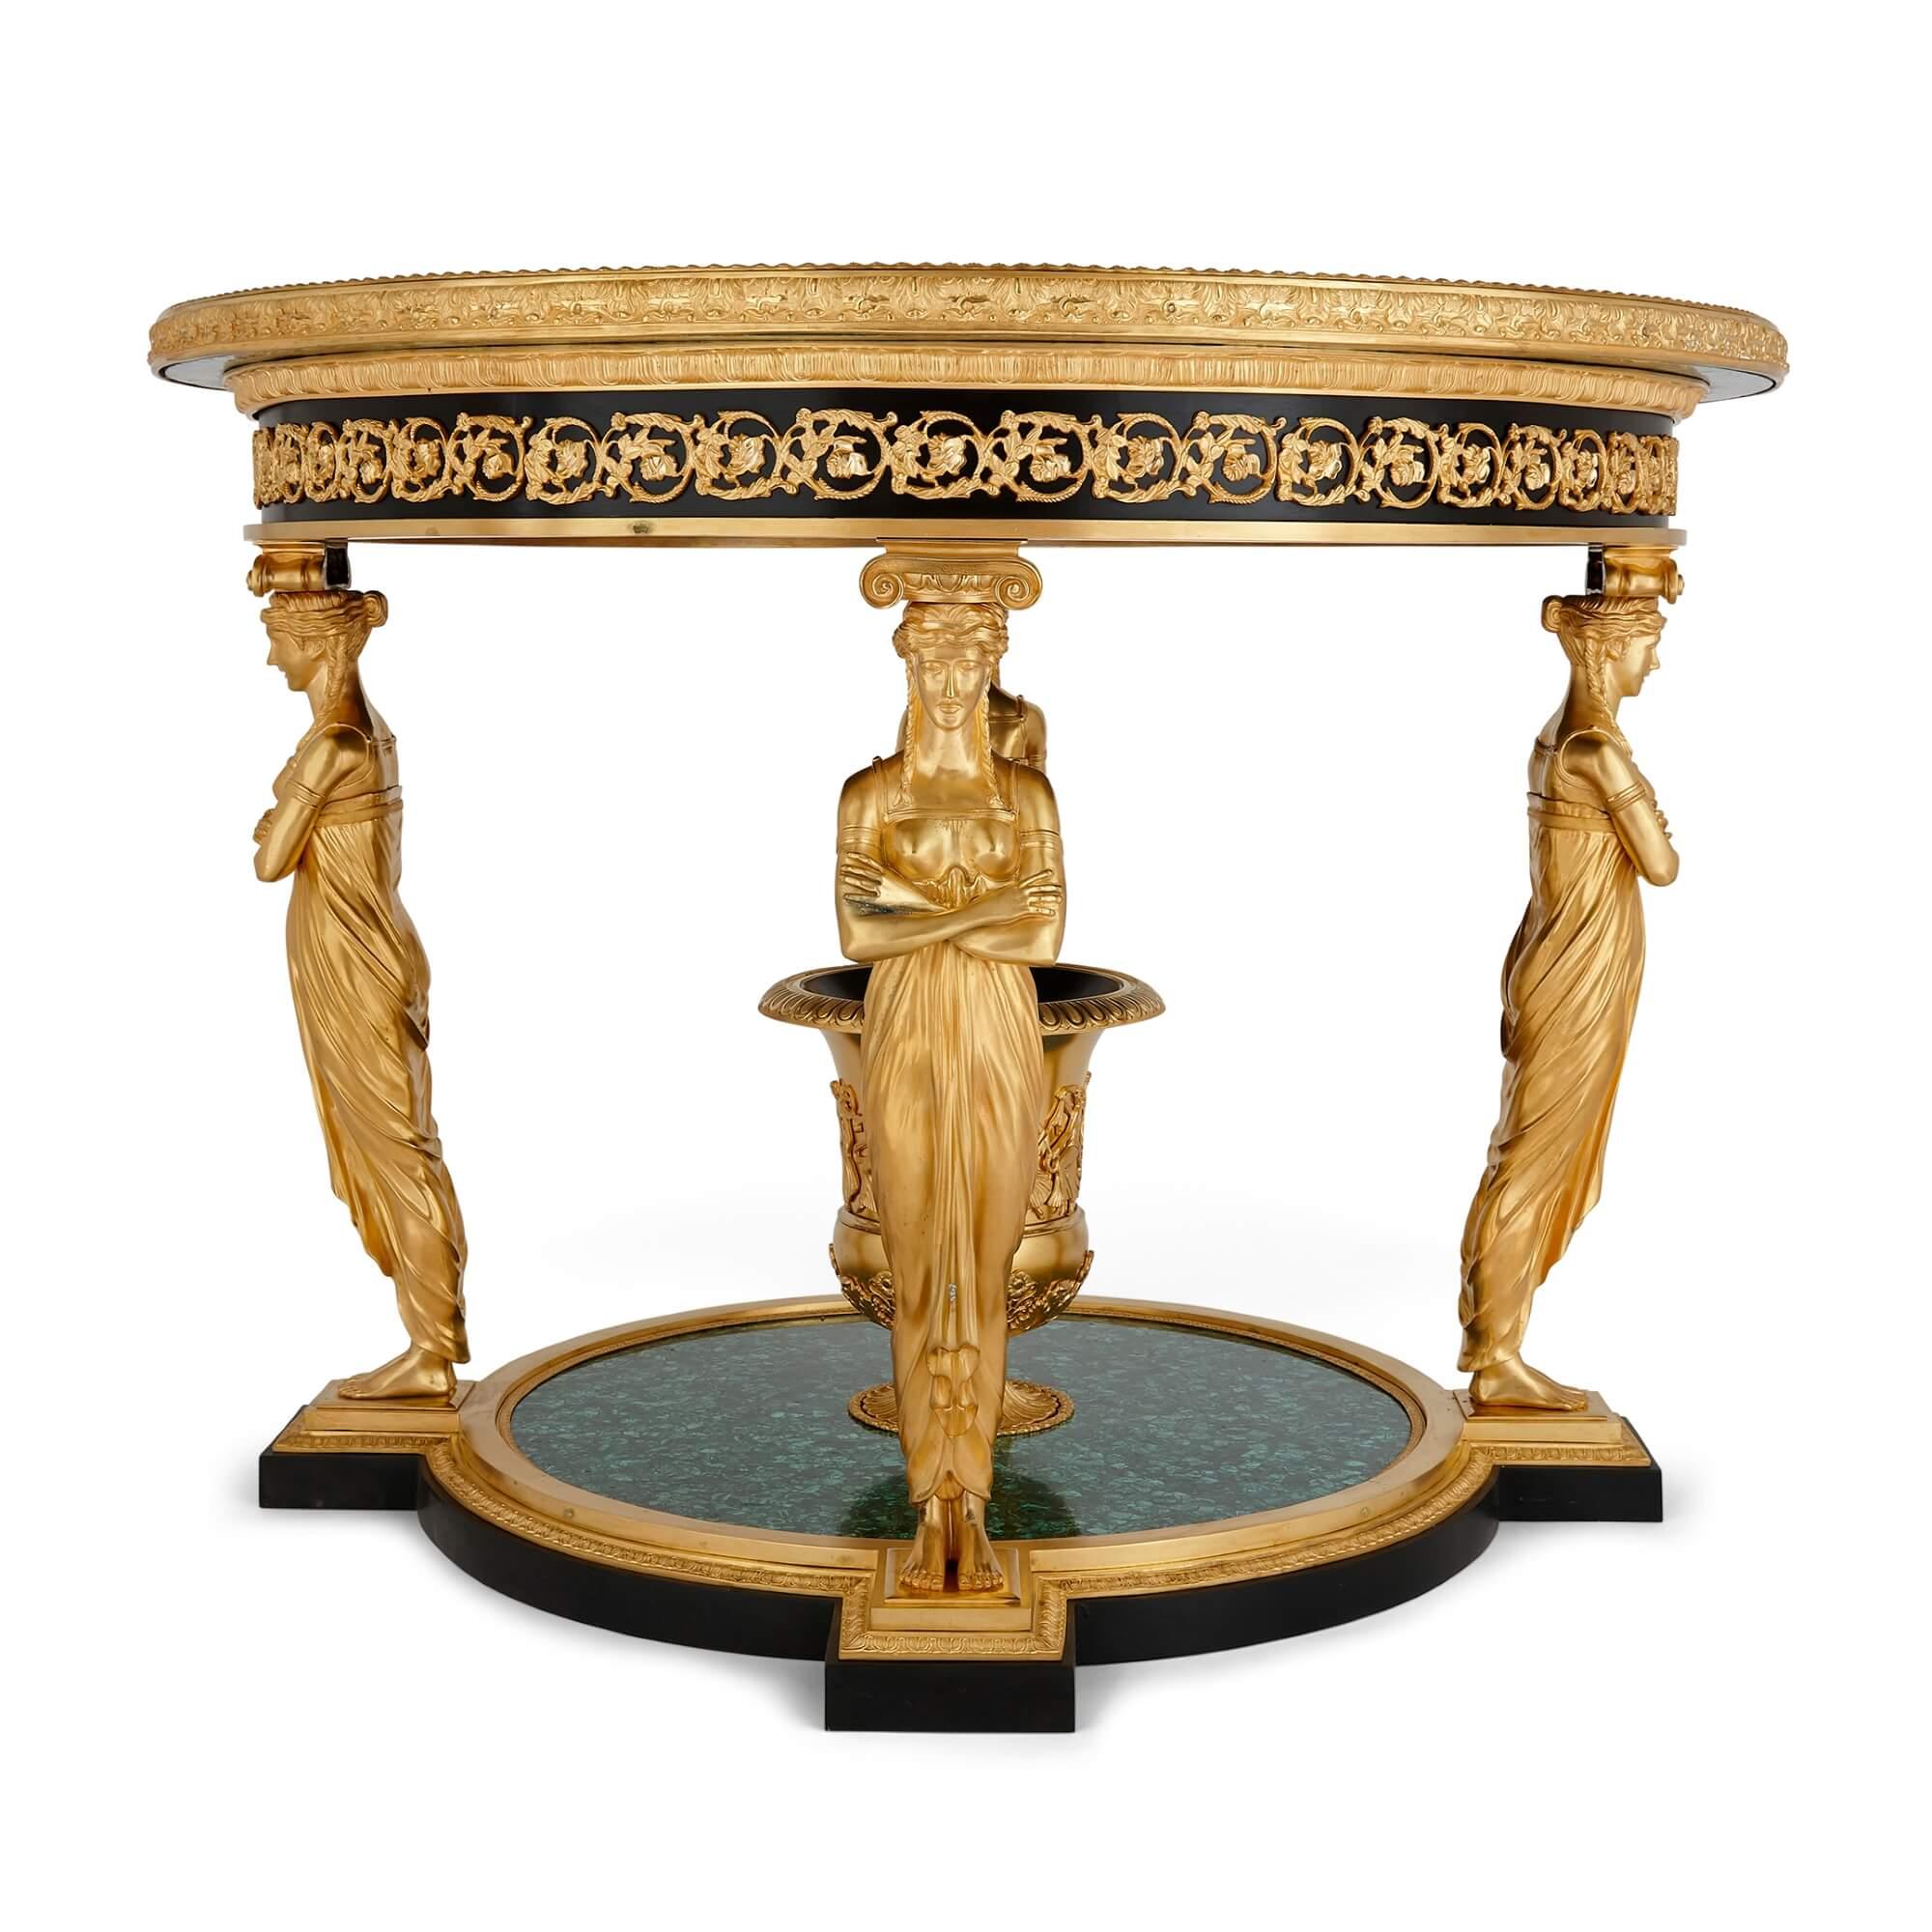 French Gilt-Bronze and Malachite Empire-Style 'Aux Caryatides' Table After Desmalter For Sale